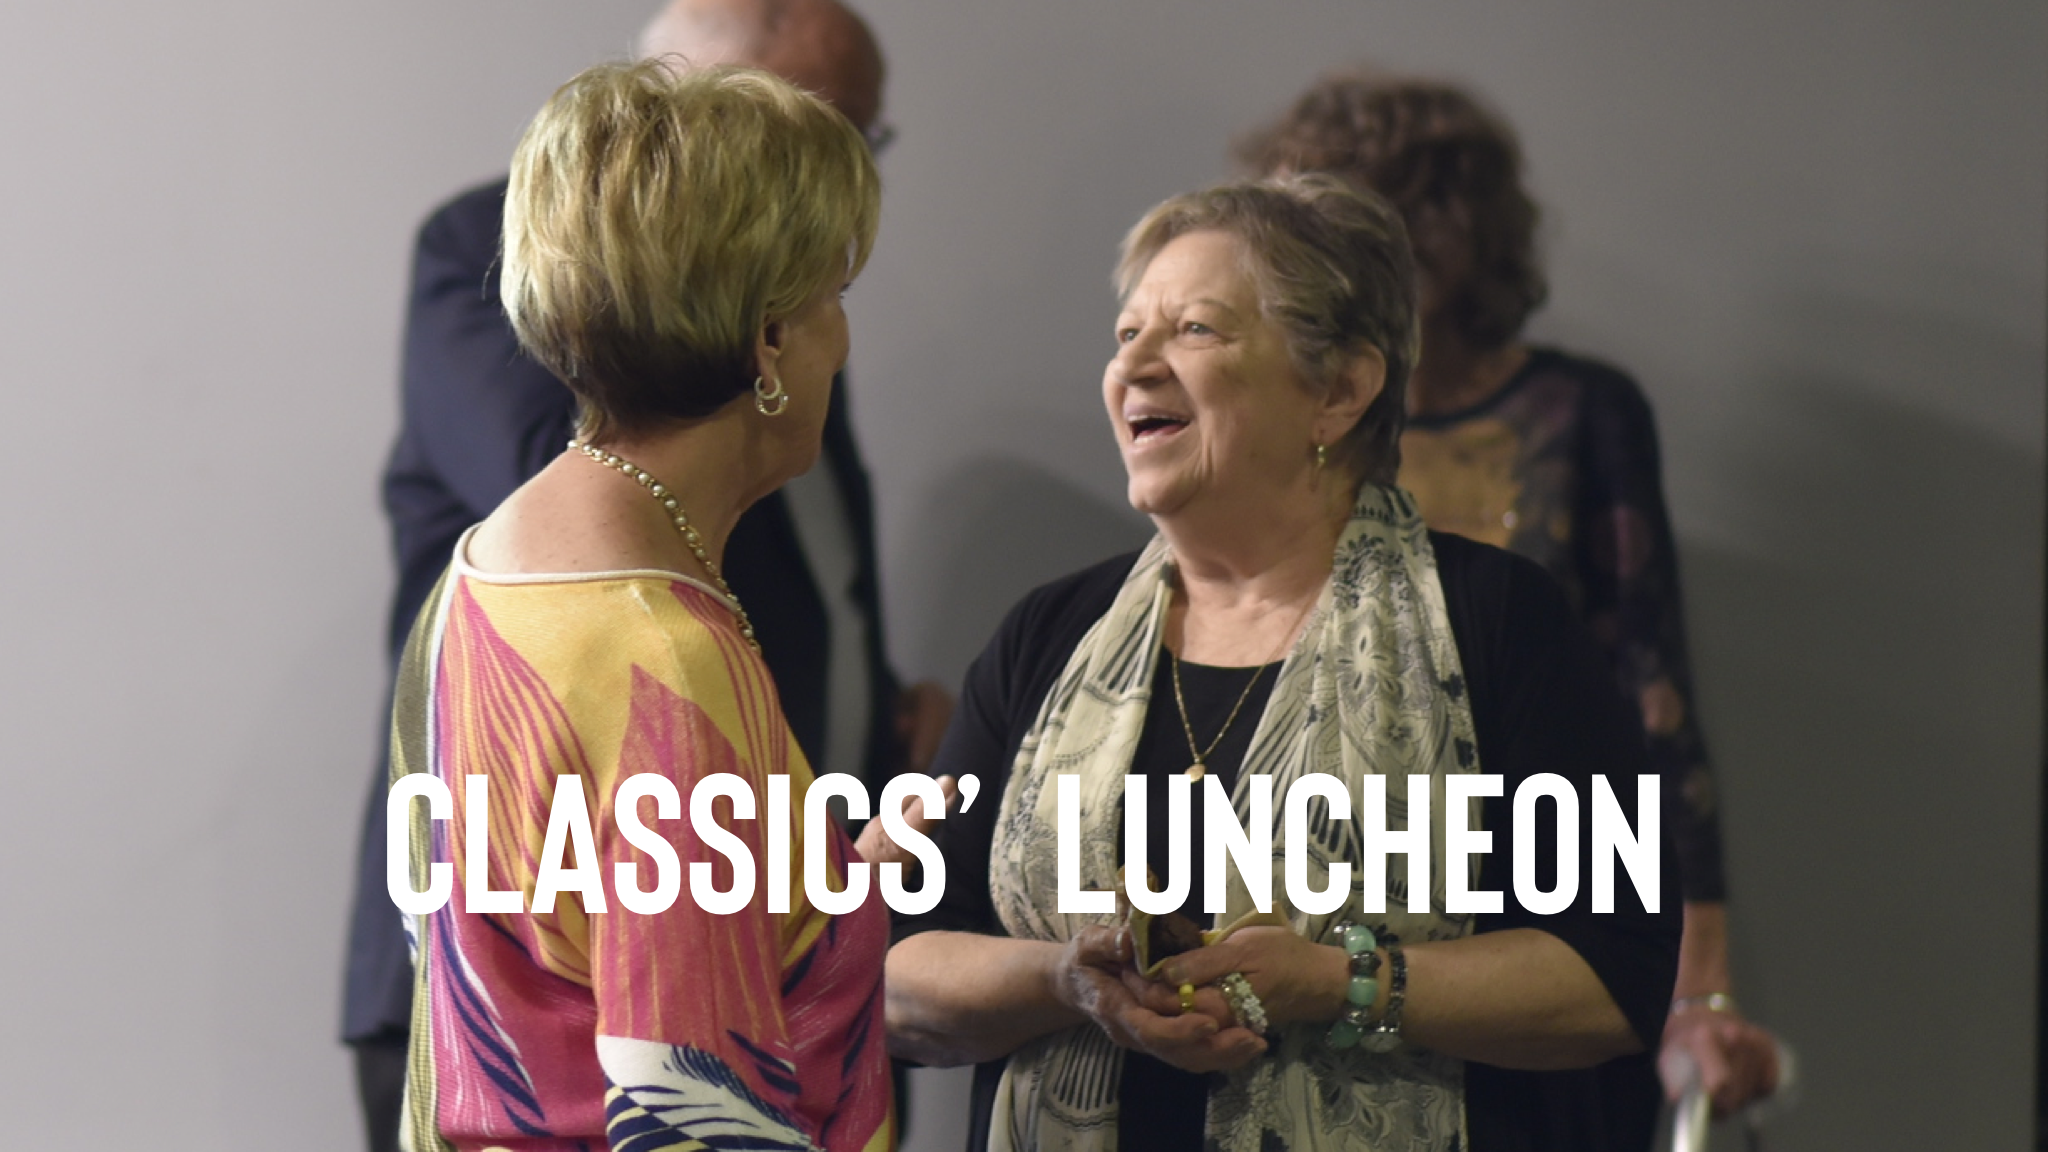 Two older ladies talking and smiling while conversing at a luncheon